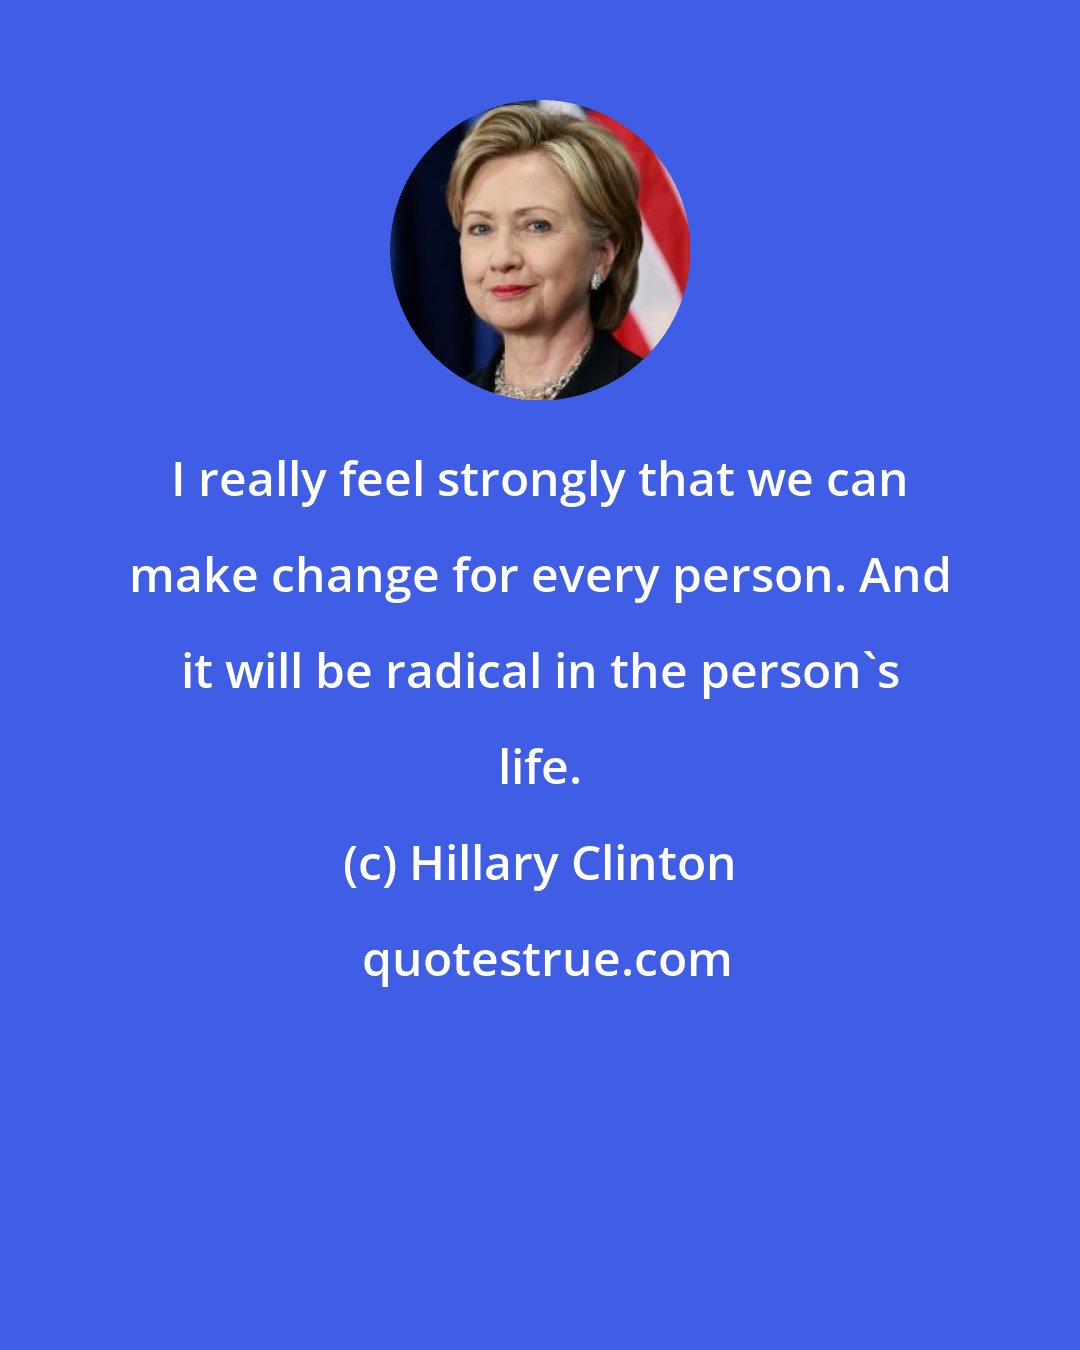 Hillary Clinton: I really feel strongly that we can make change for every person. And it will be radical in the person's life.